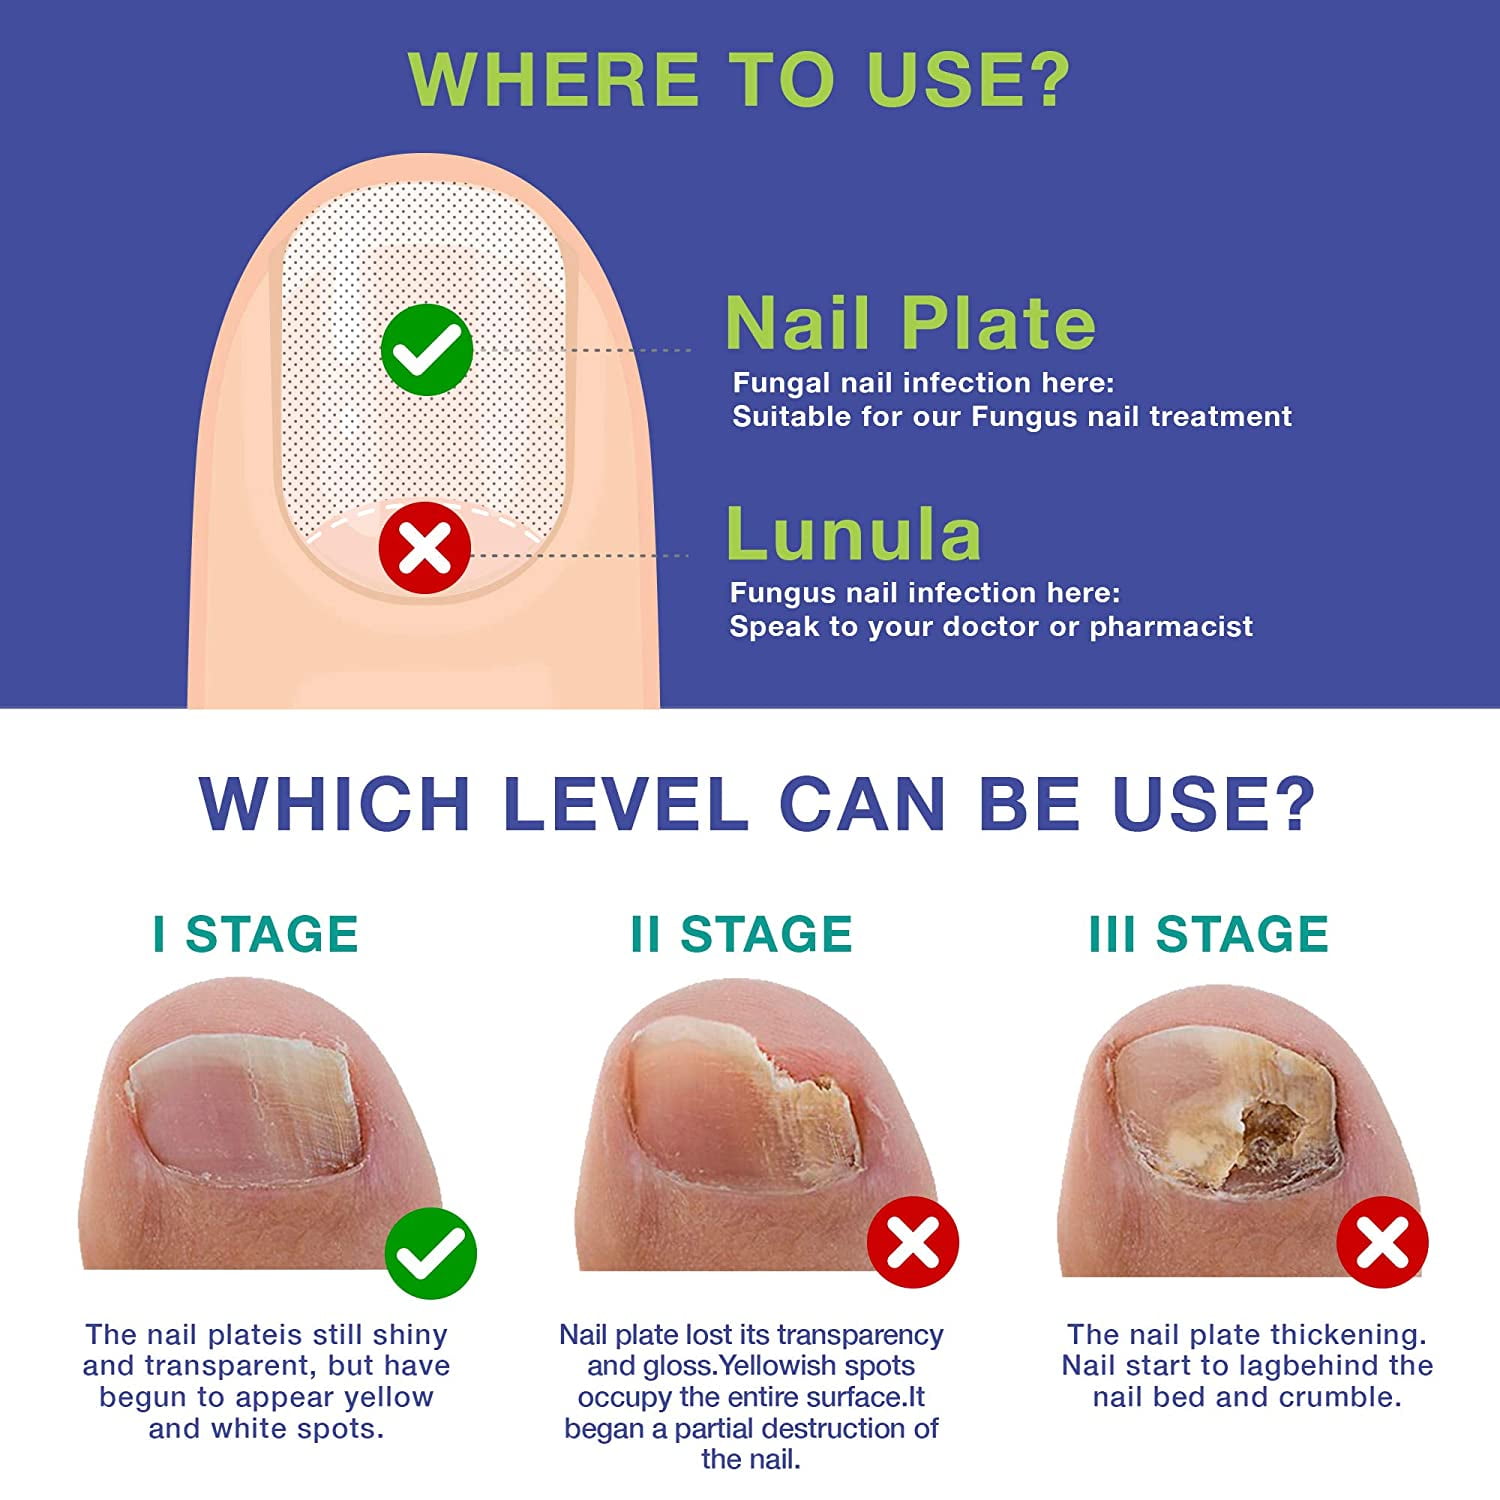 Podiatry Care Specialists - Toenail fungus is an infection that is  contagious and often difficult to get rid of. While some patients may  experience a mild case and barely even notice the